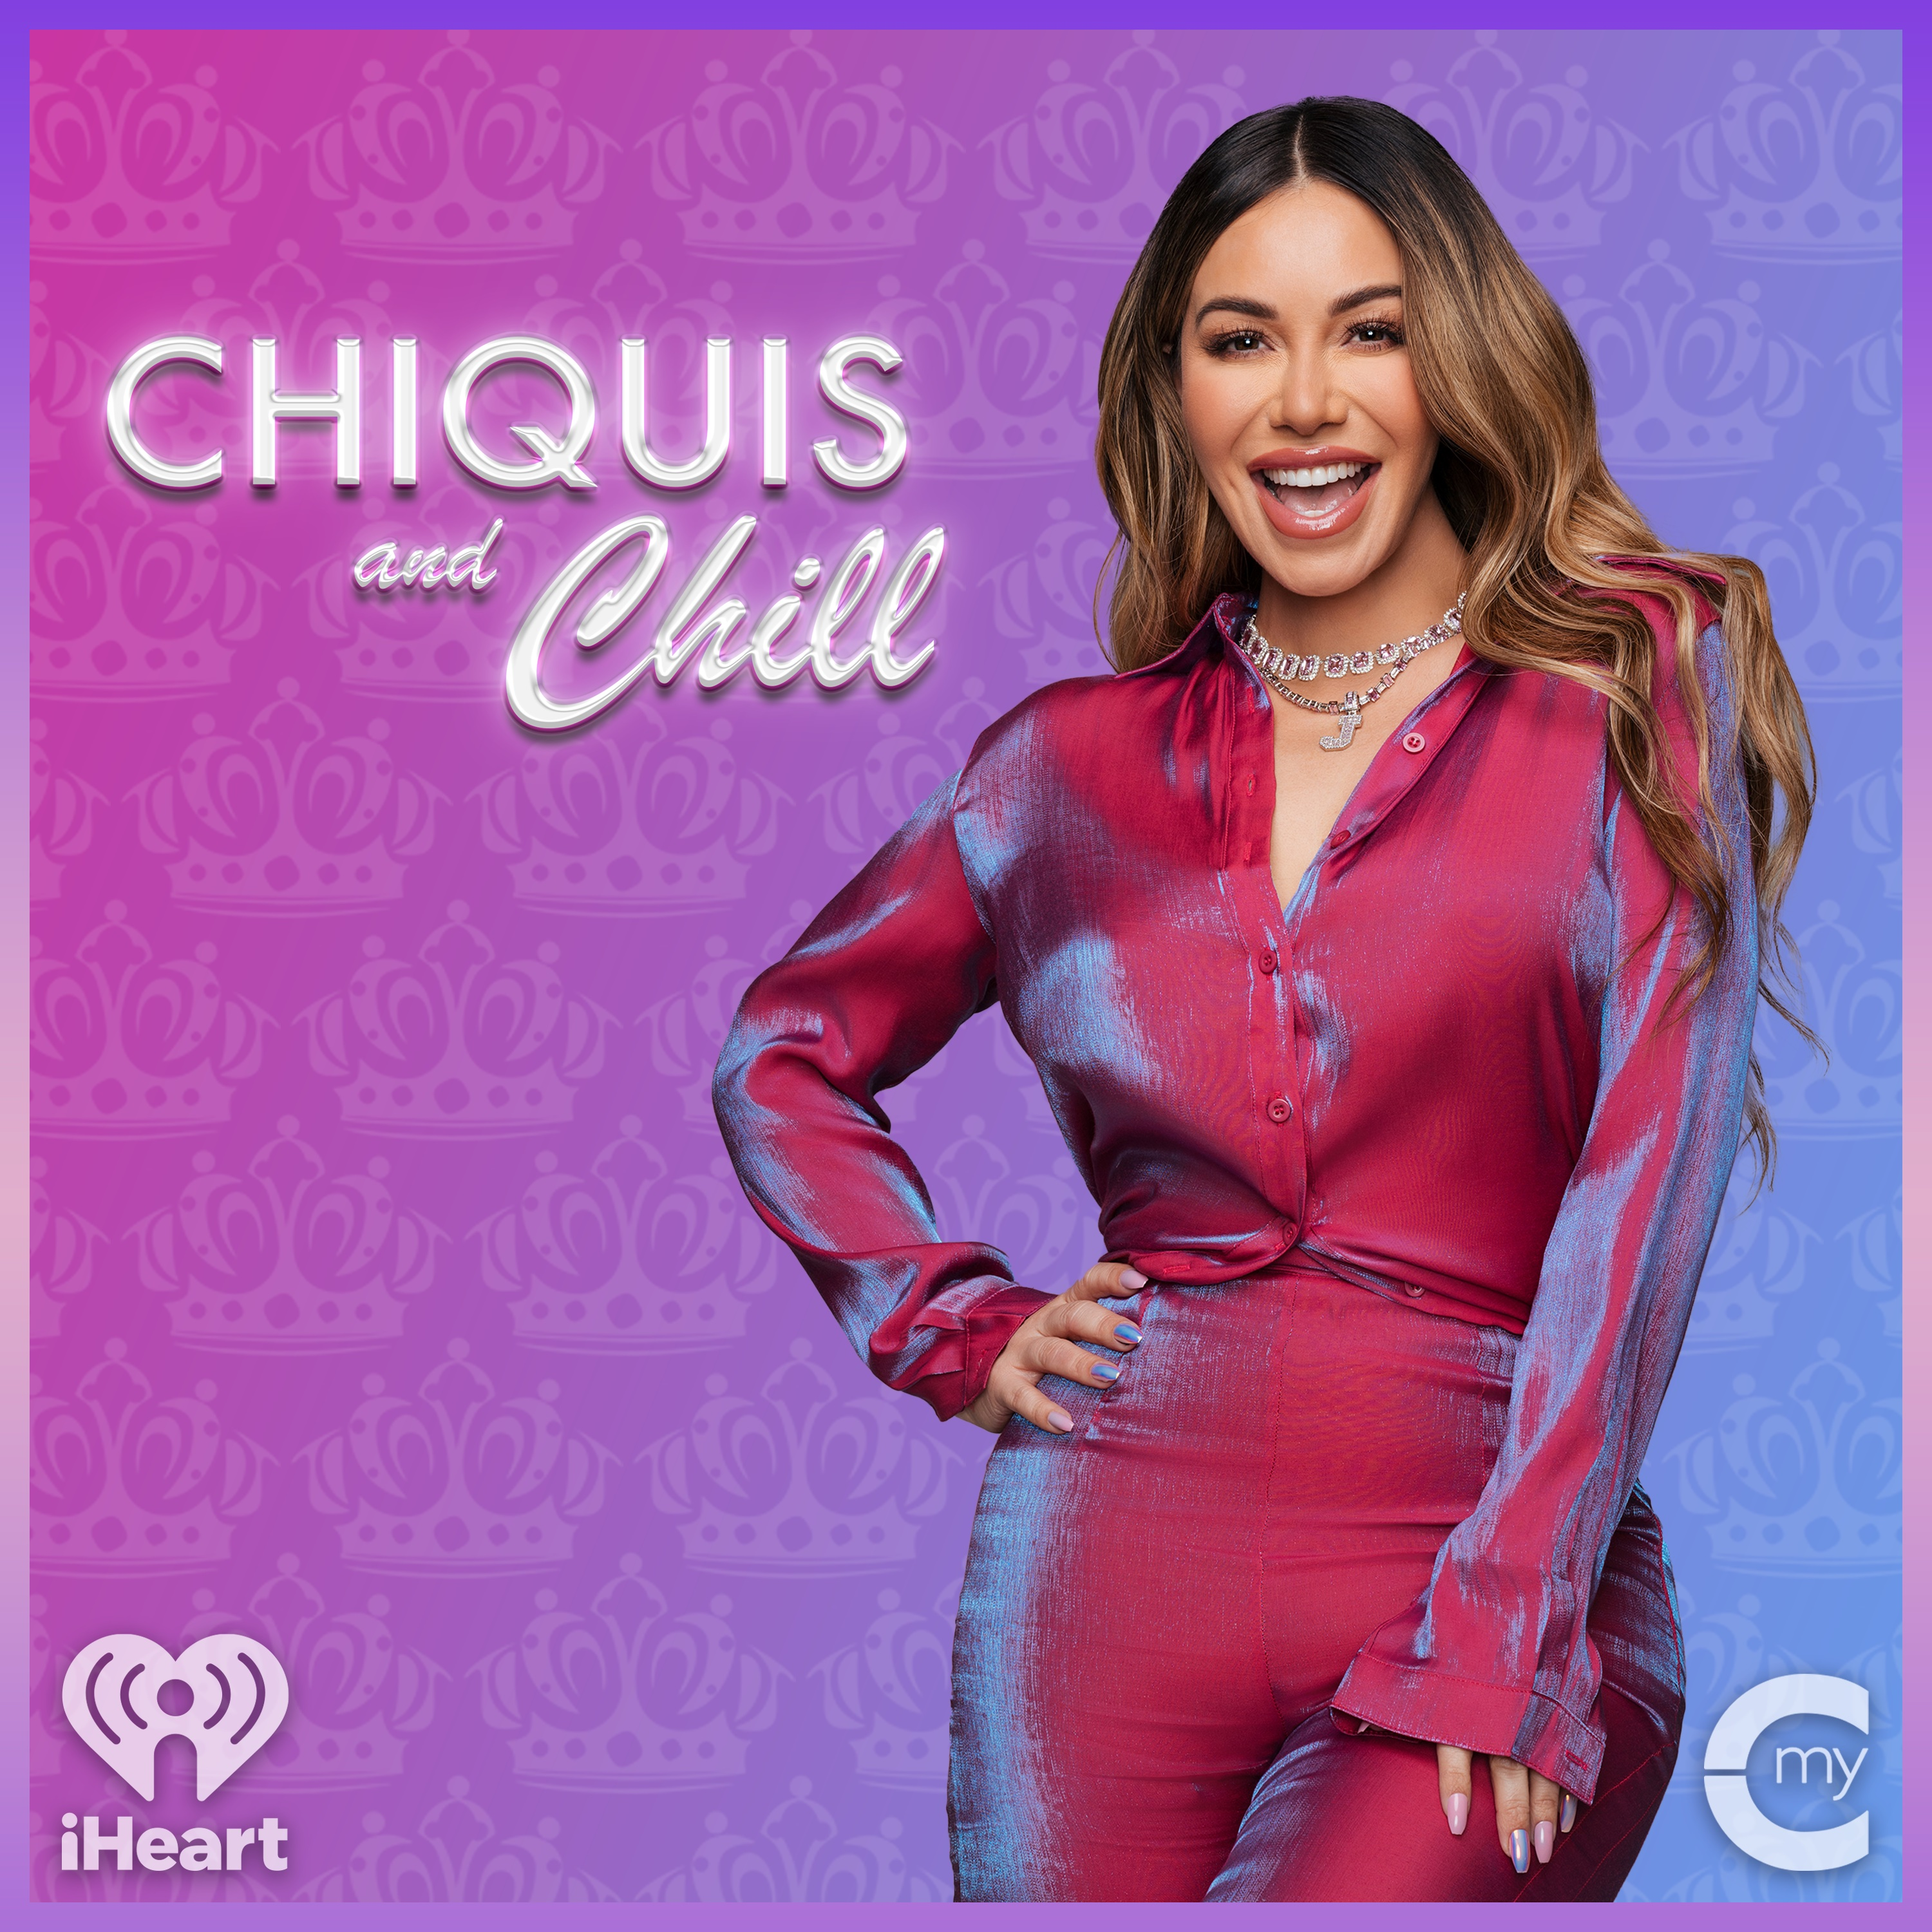 Chiquis and RaqC Set the Record Straight